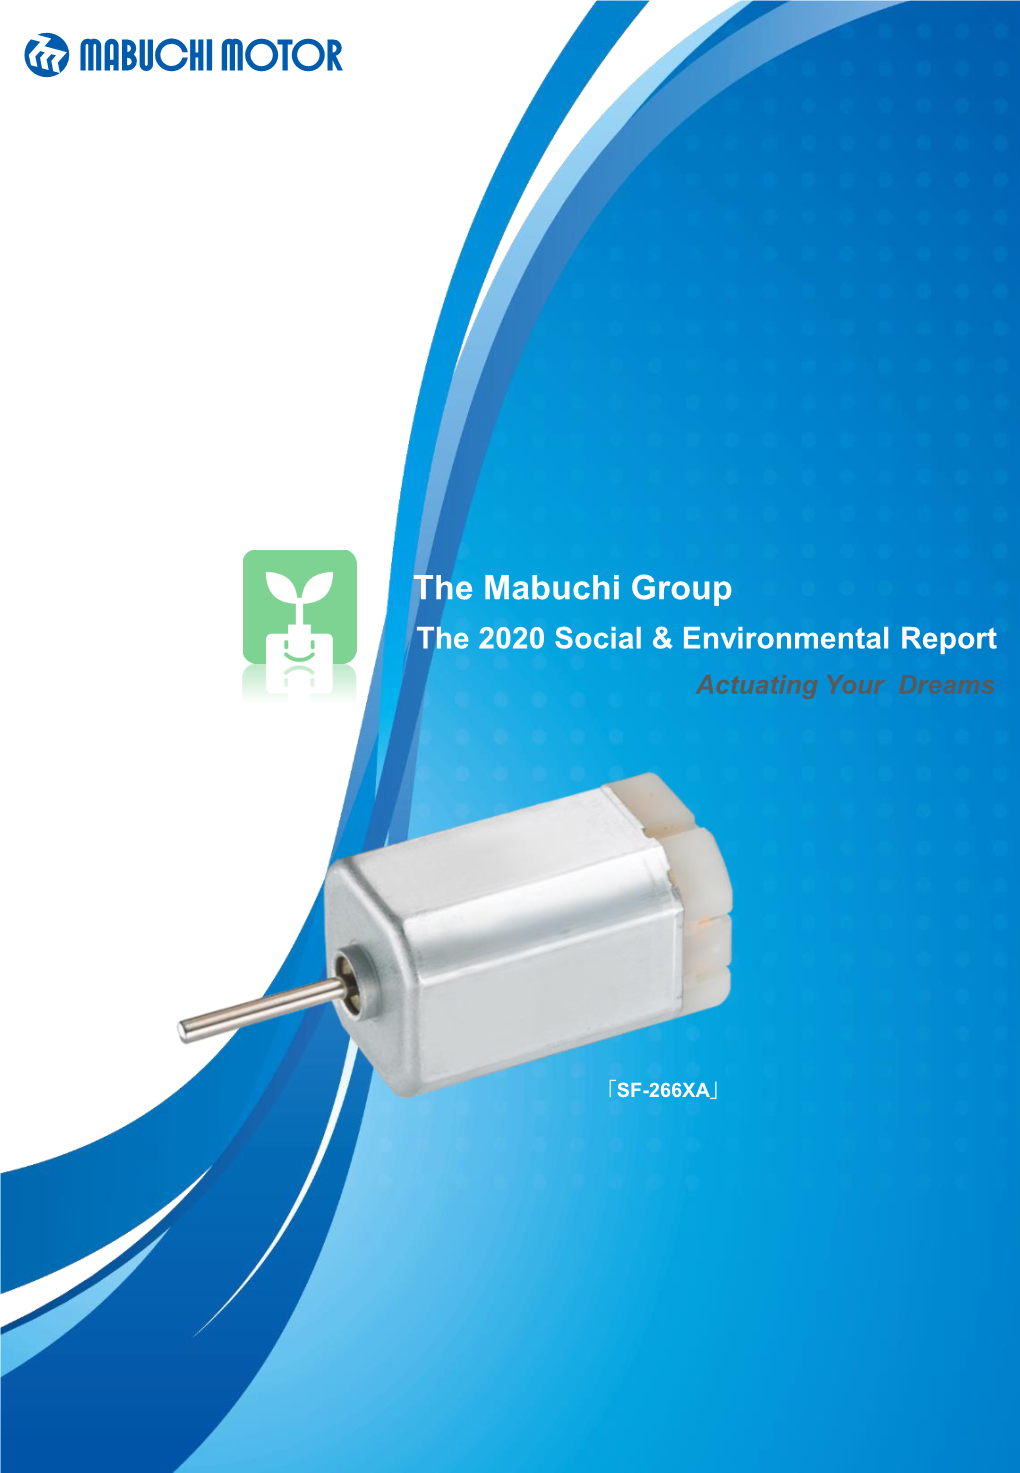 The Mabuchi Group the 2020 Social & Environmental Report Actuating Your Dreams